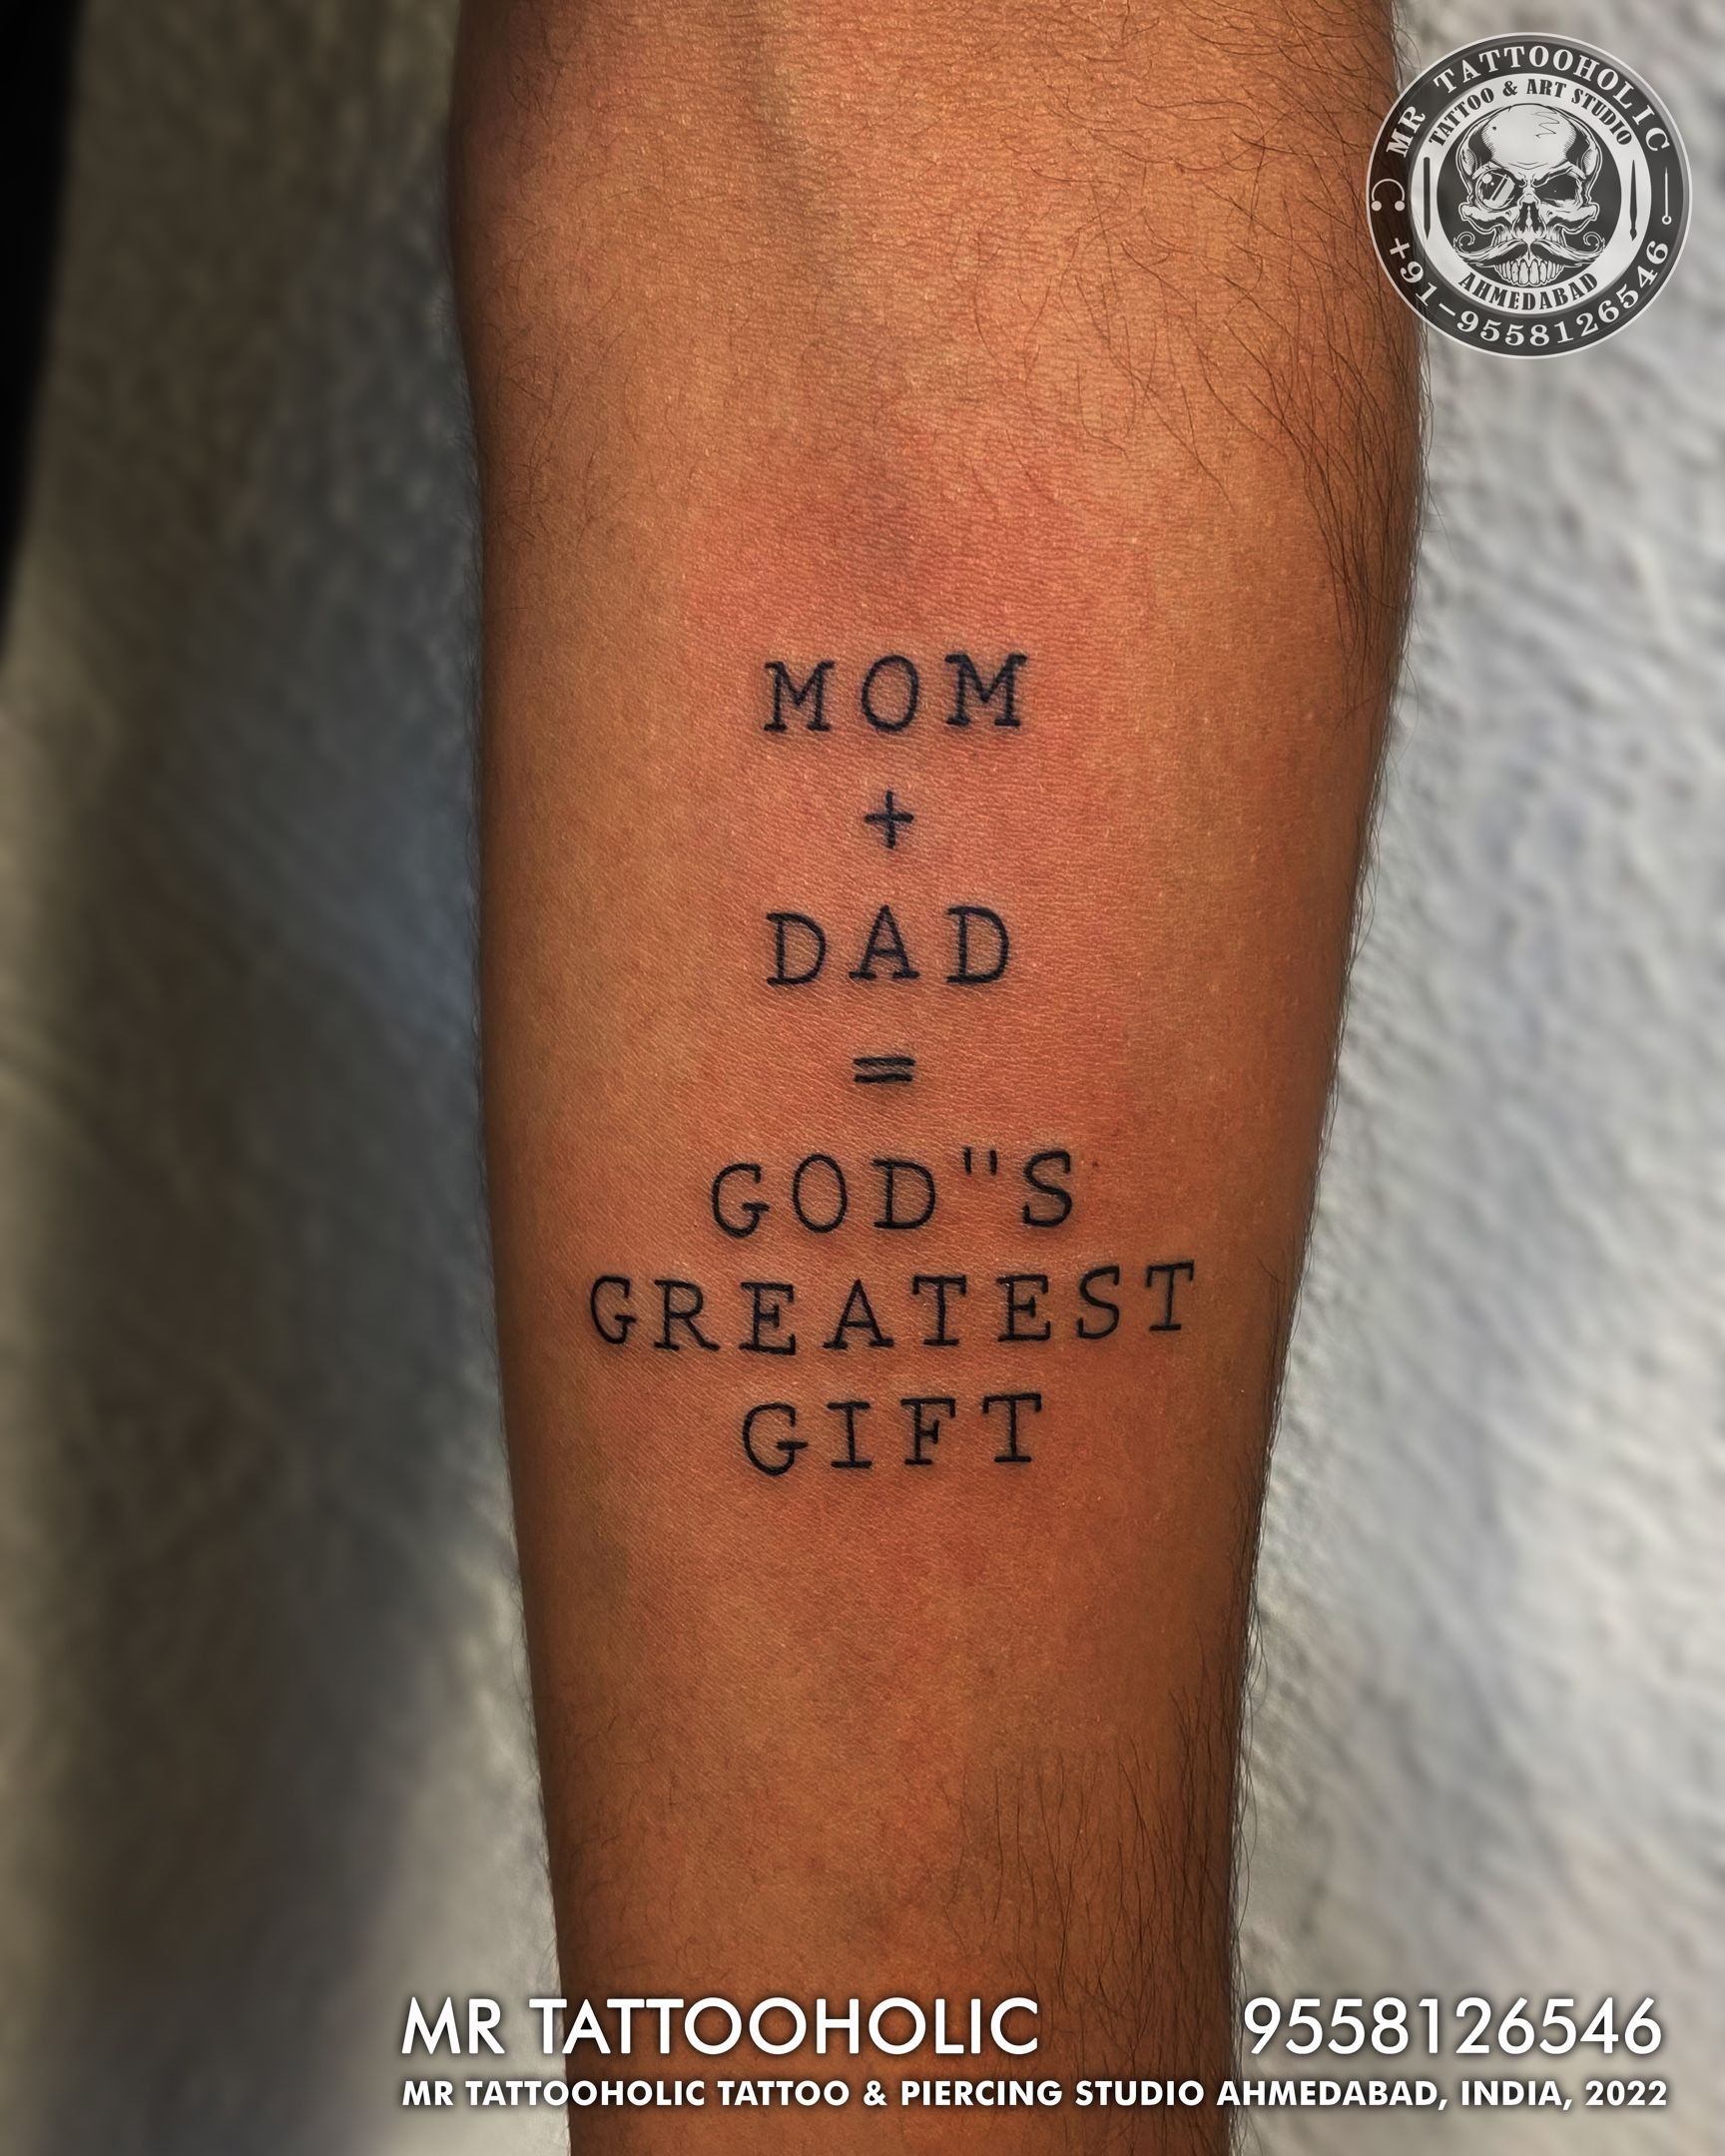 Aggregate 63+ gift from god tattoo best - in.cdgdbentre